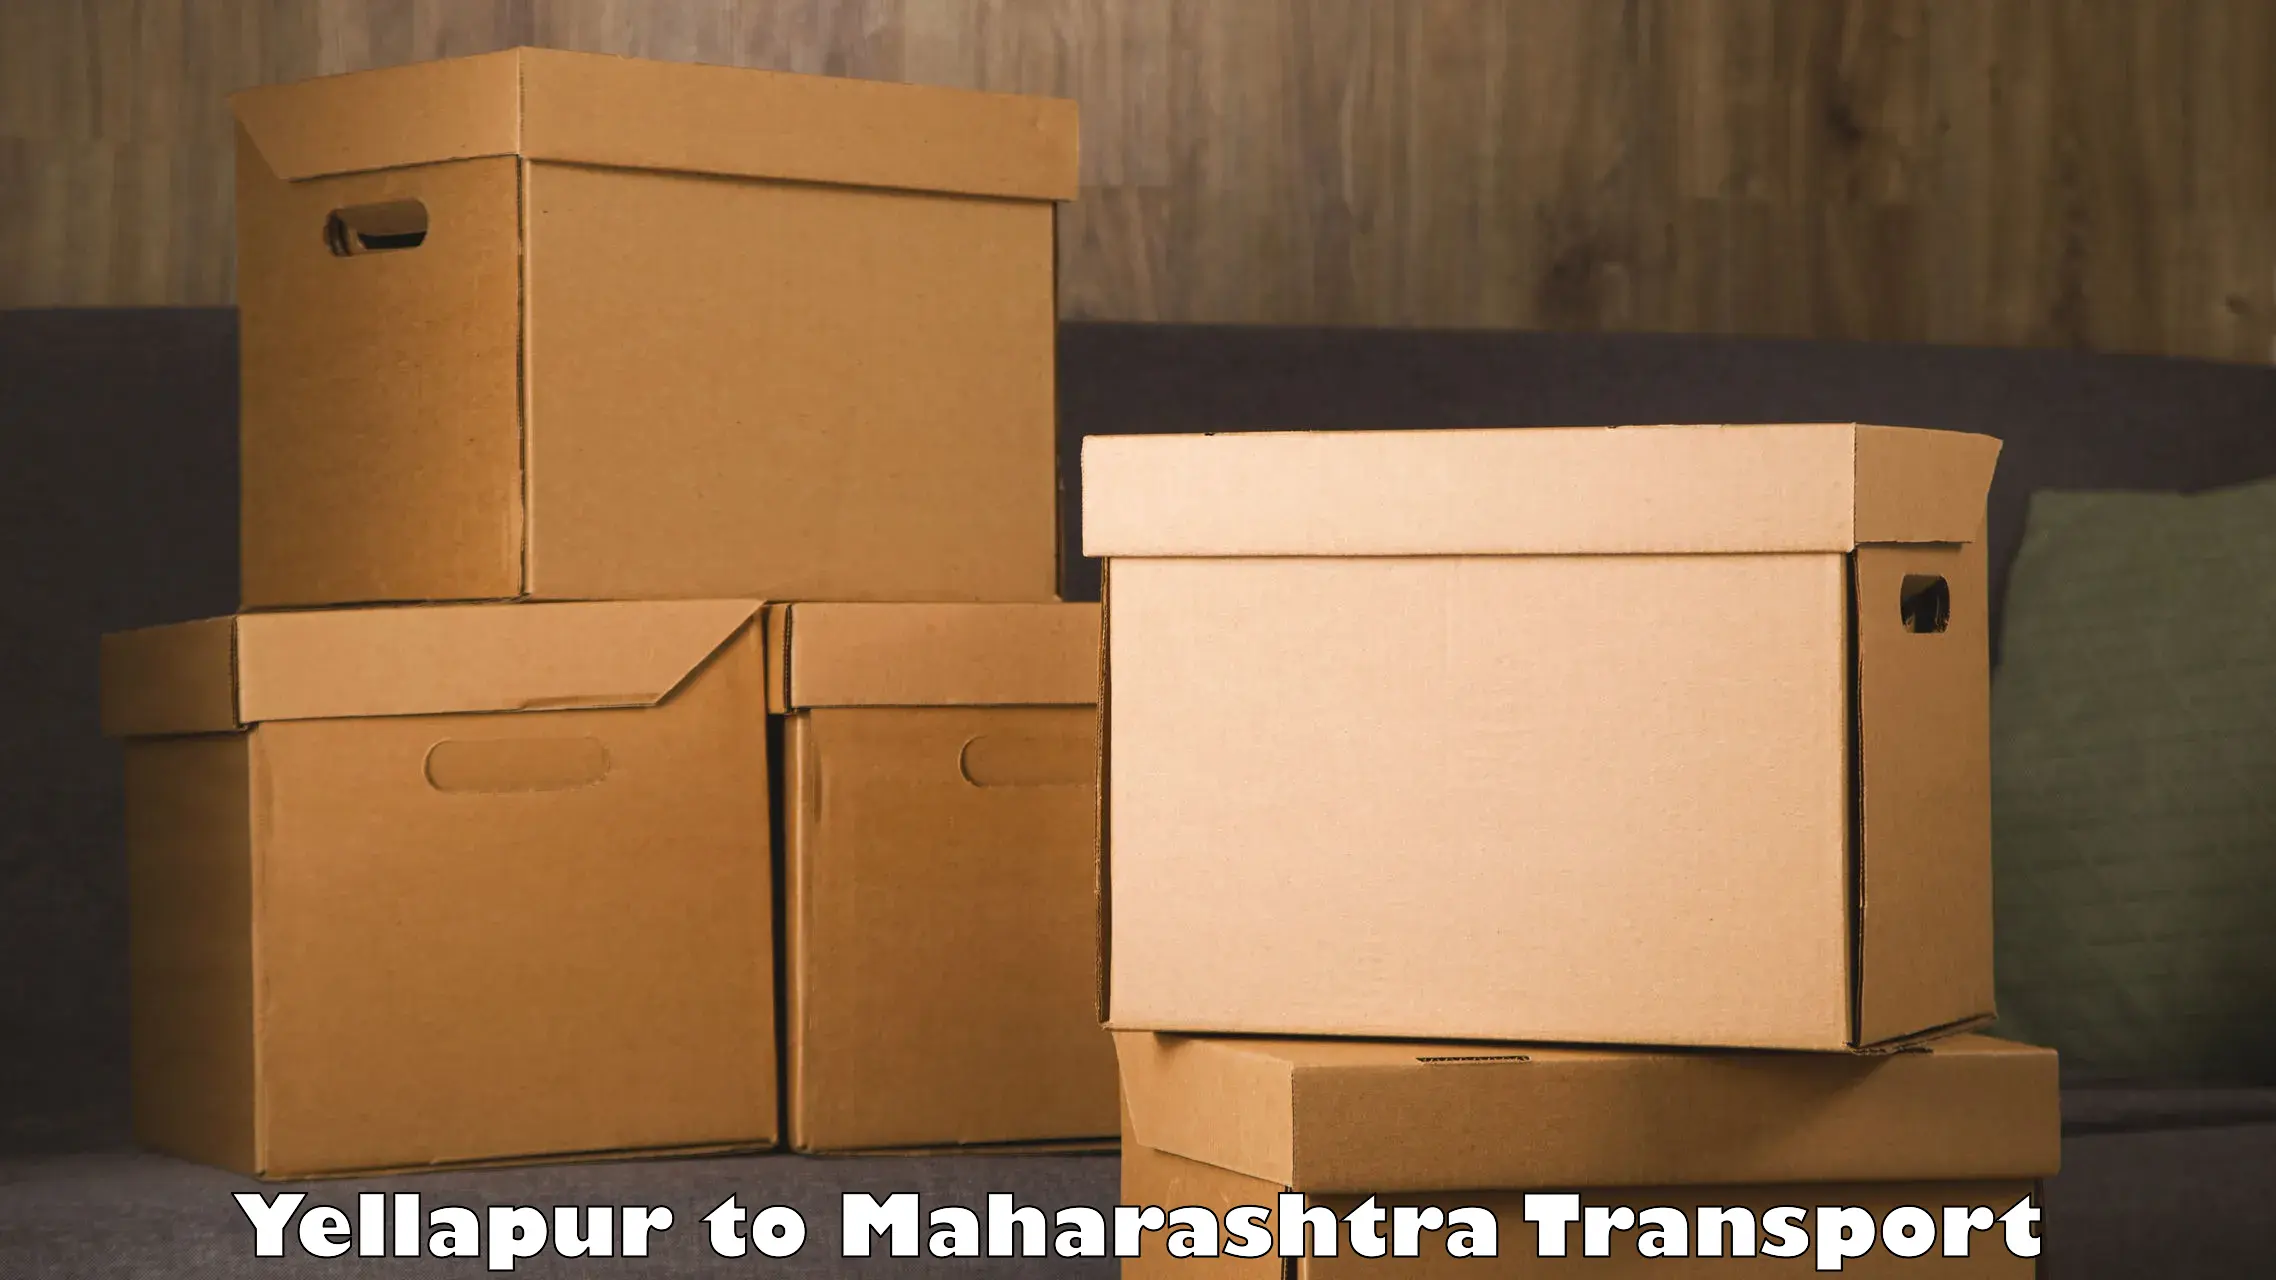 Container transportation services Yellapur to Nagpur